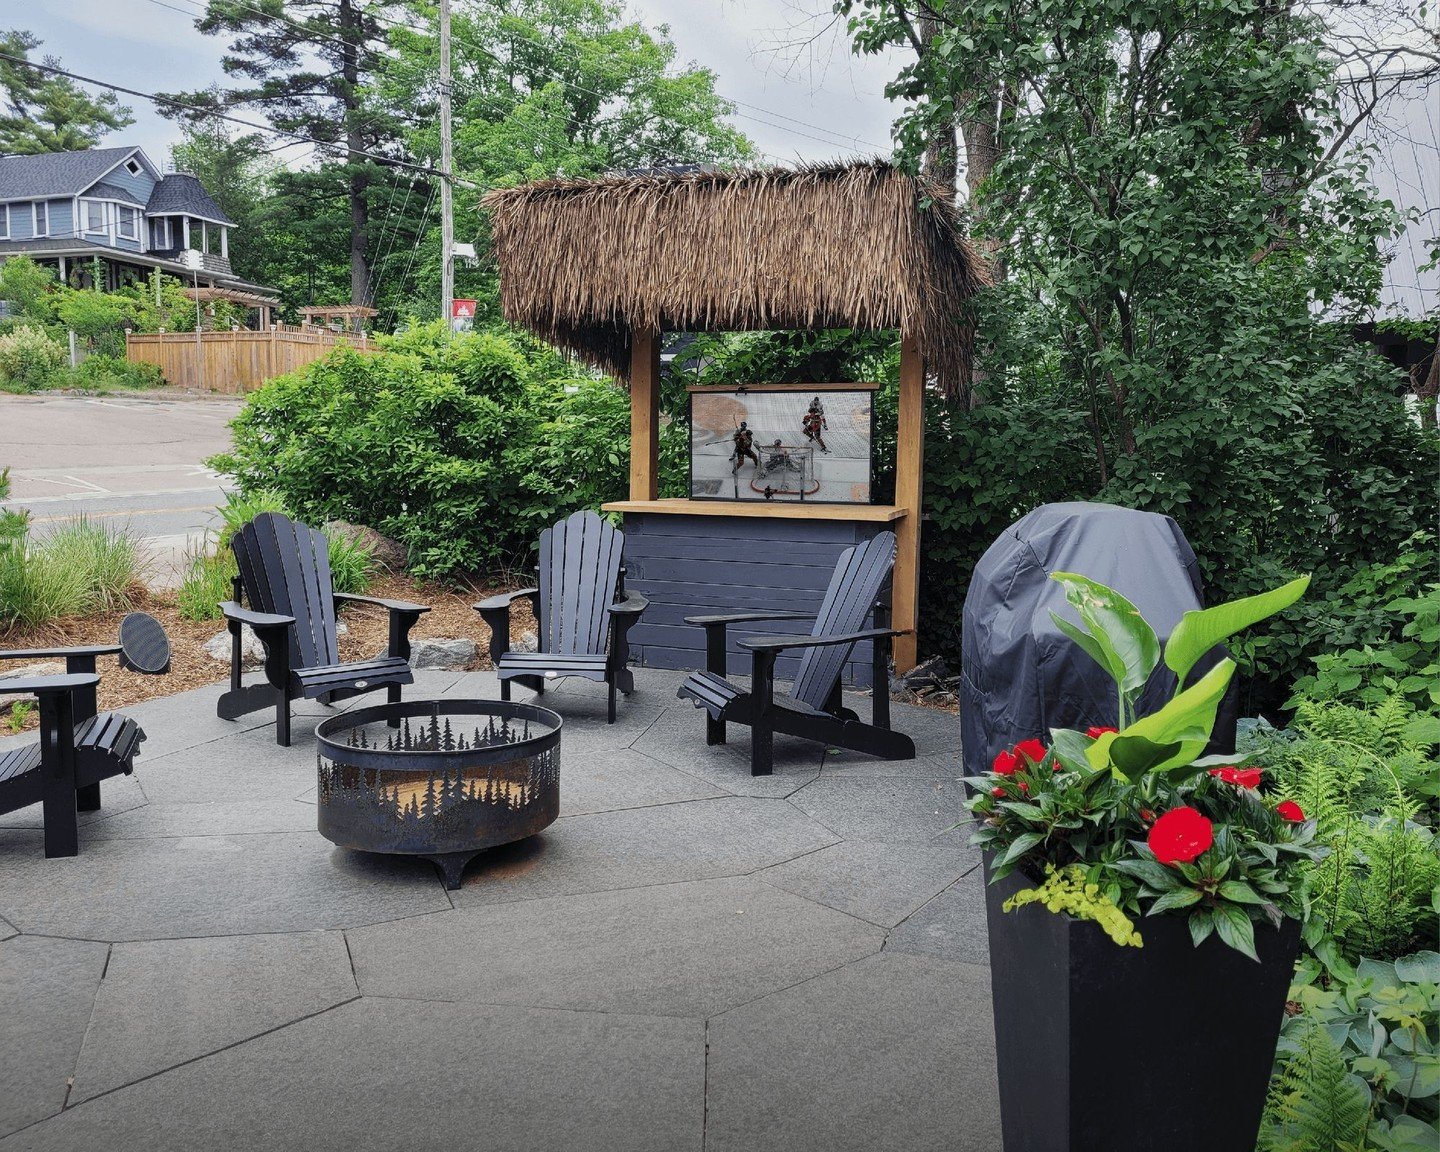 Playoff hockey is a special time for passionate hockey fans, and as the intensity ramps up on the ice, so does the weather here in #Muskoka. 🏒🥅 

Here at Muskoka Smart Homes, we're busy getting our outdoor showroom ready for the season ahead so we 